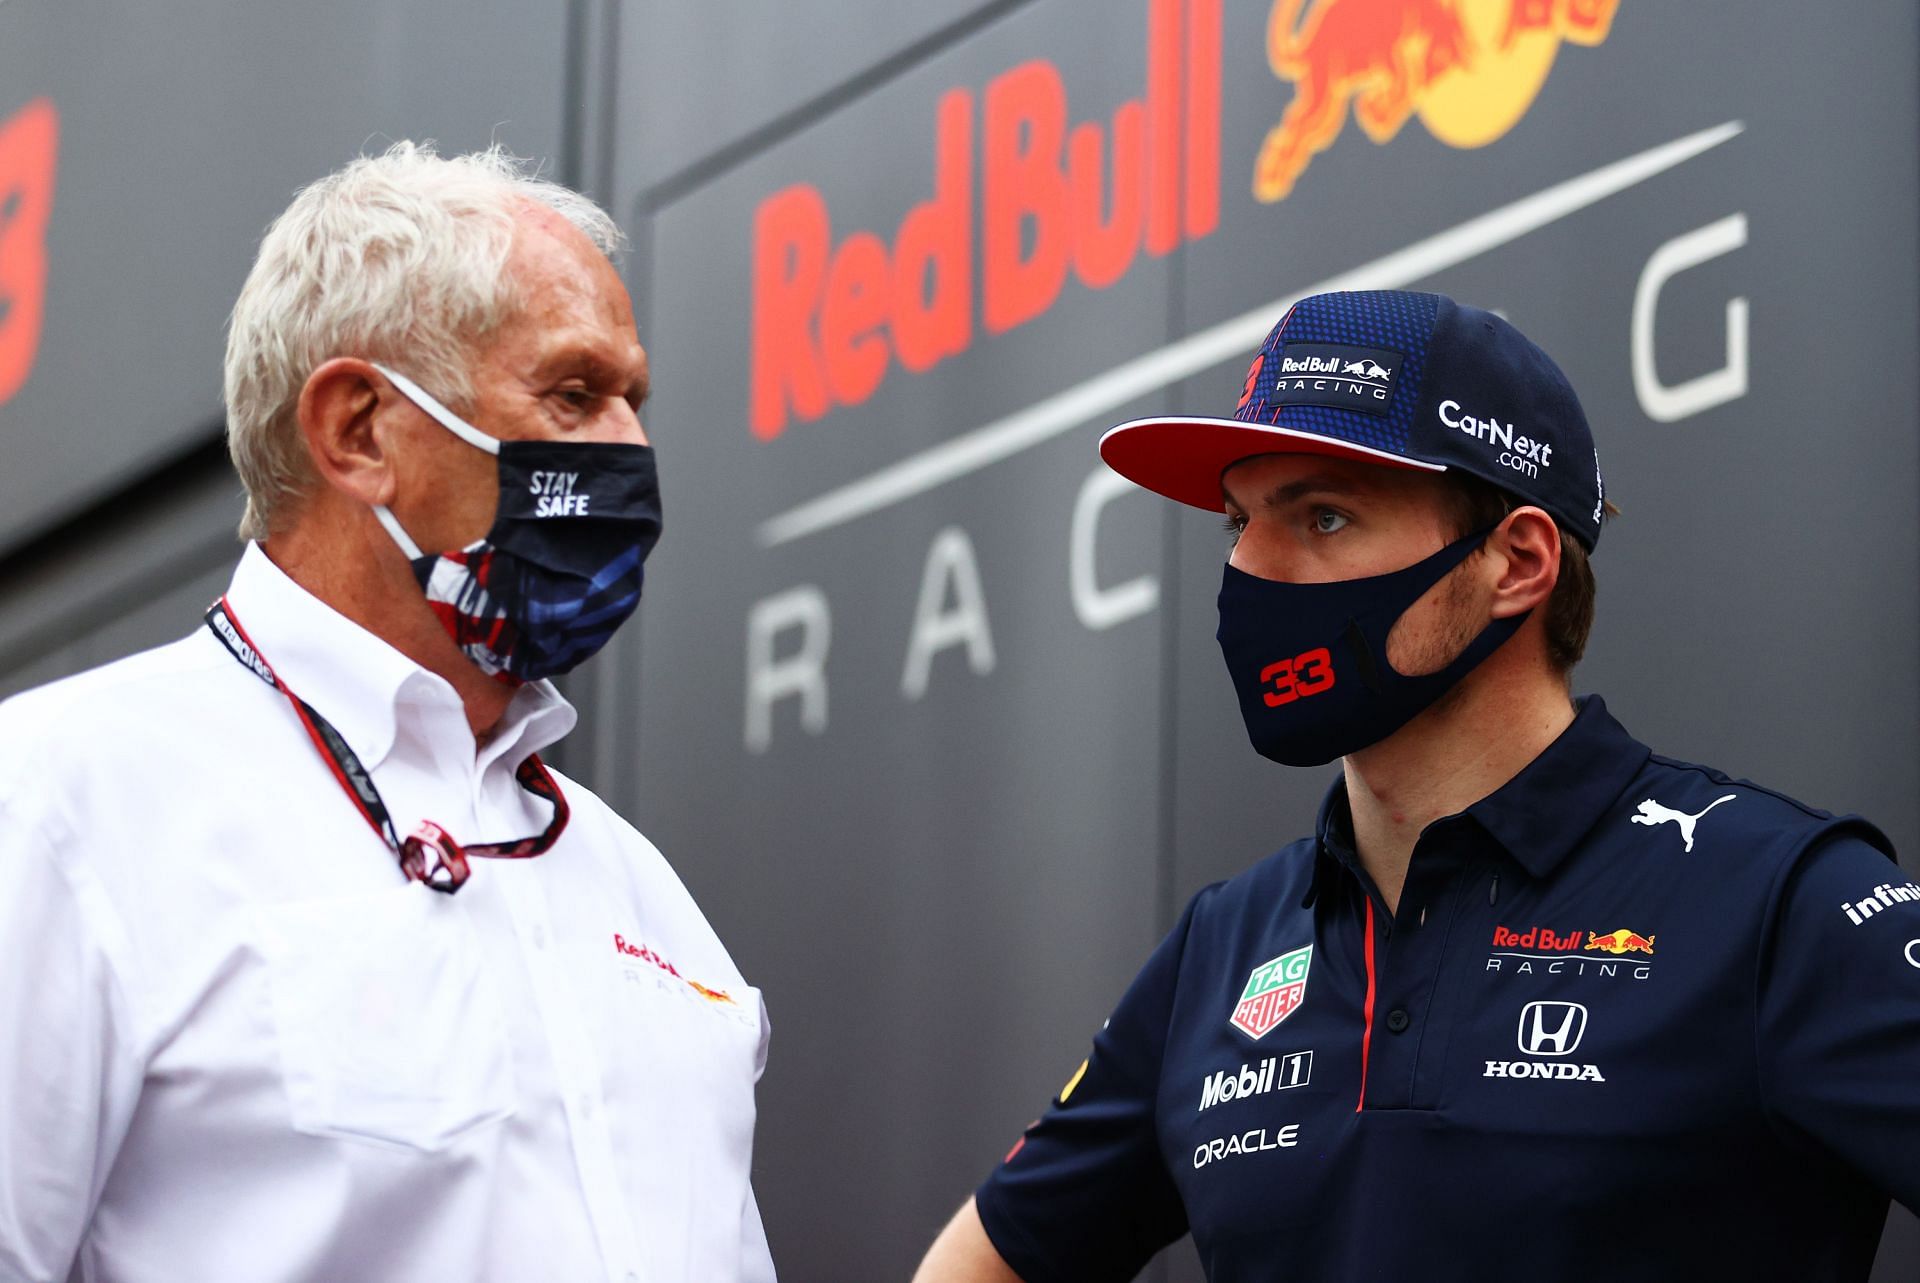 Max Verstappen talks with Red Bull Racing Team Consultant Dr Helmut Marko in the Paddock in Monza, Italy. (Photo by Bryn Lennon/Getty Images)